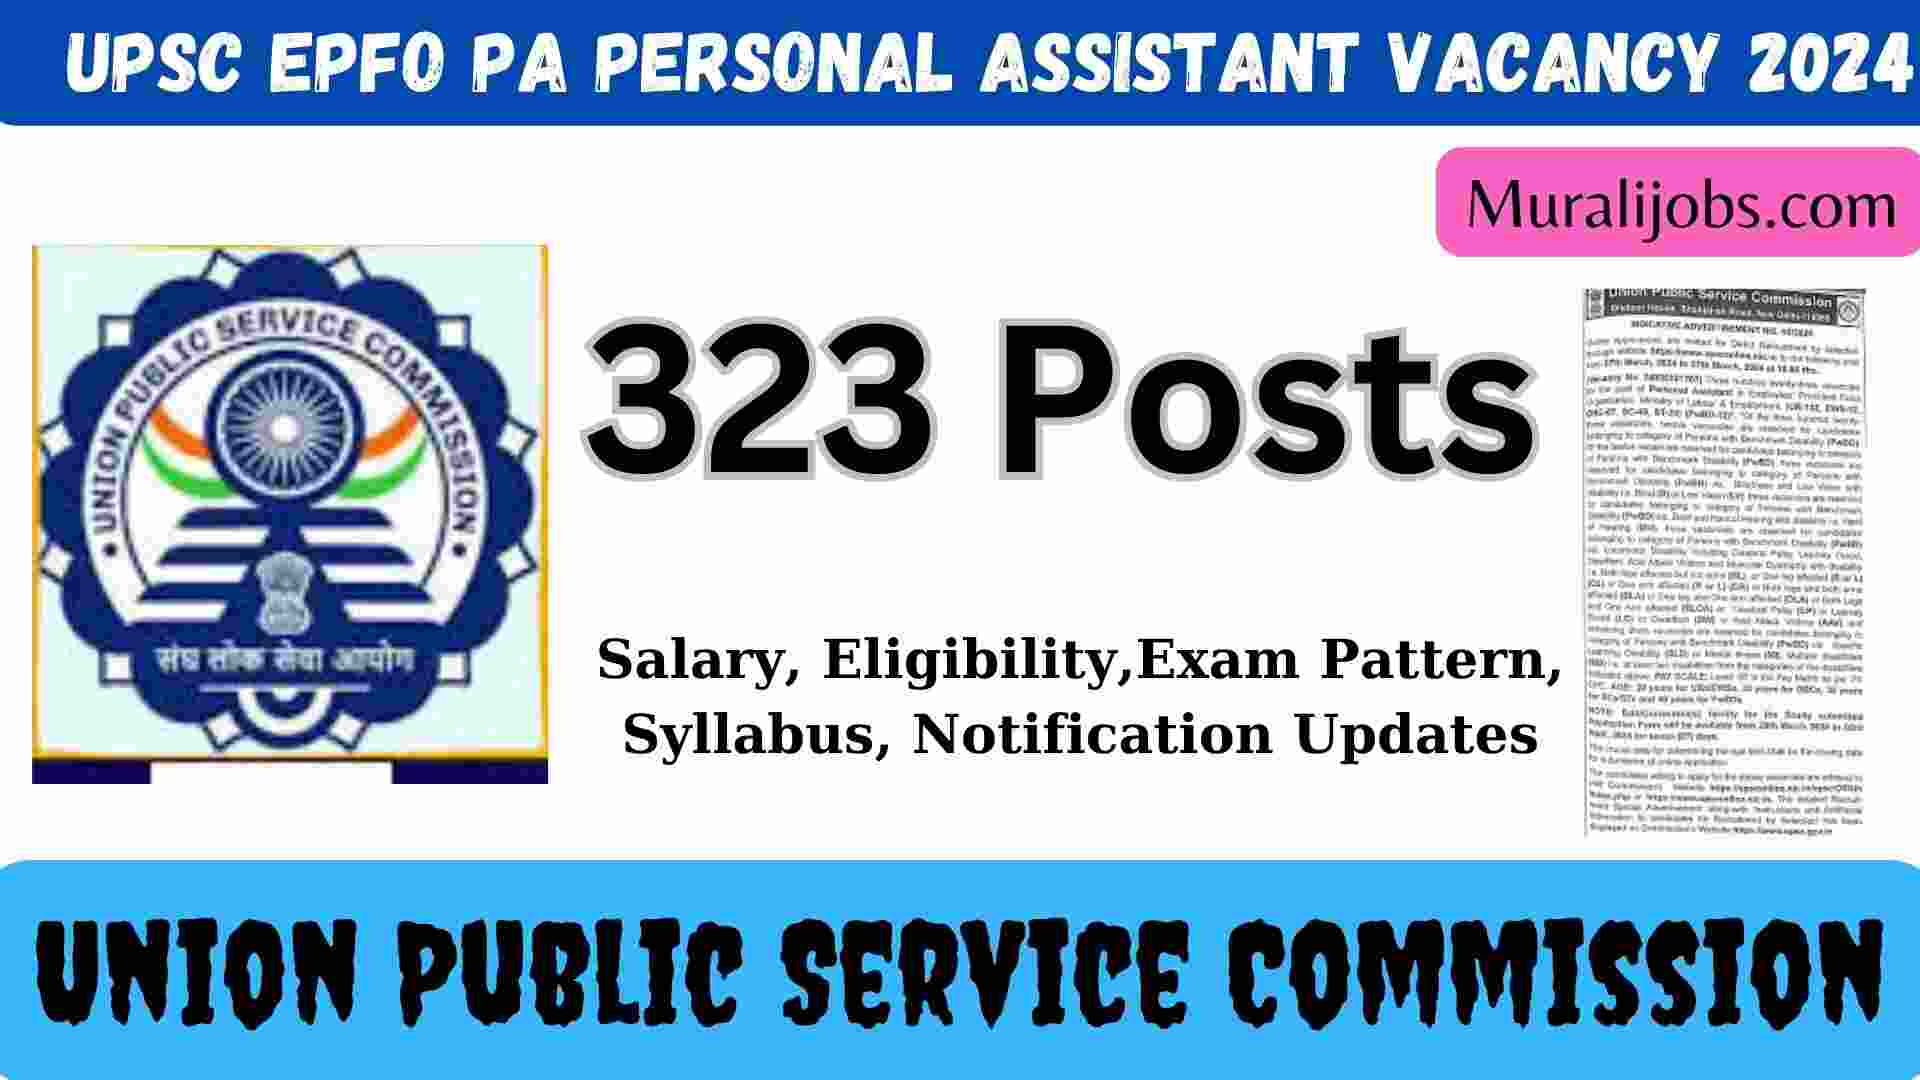 UPSC EPFO PA	Personal Assistant Vacancy 2024